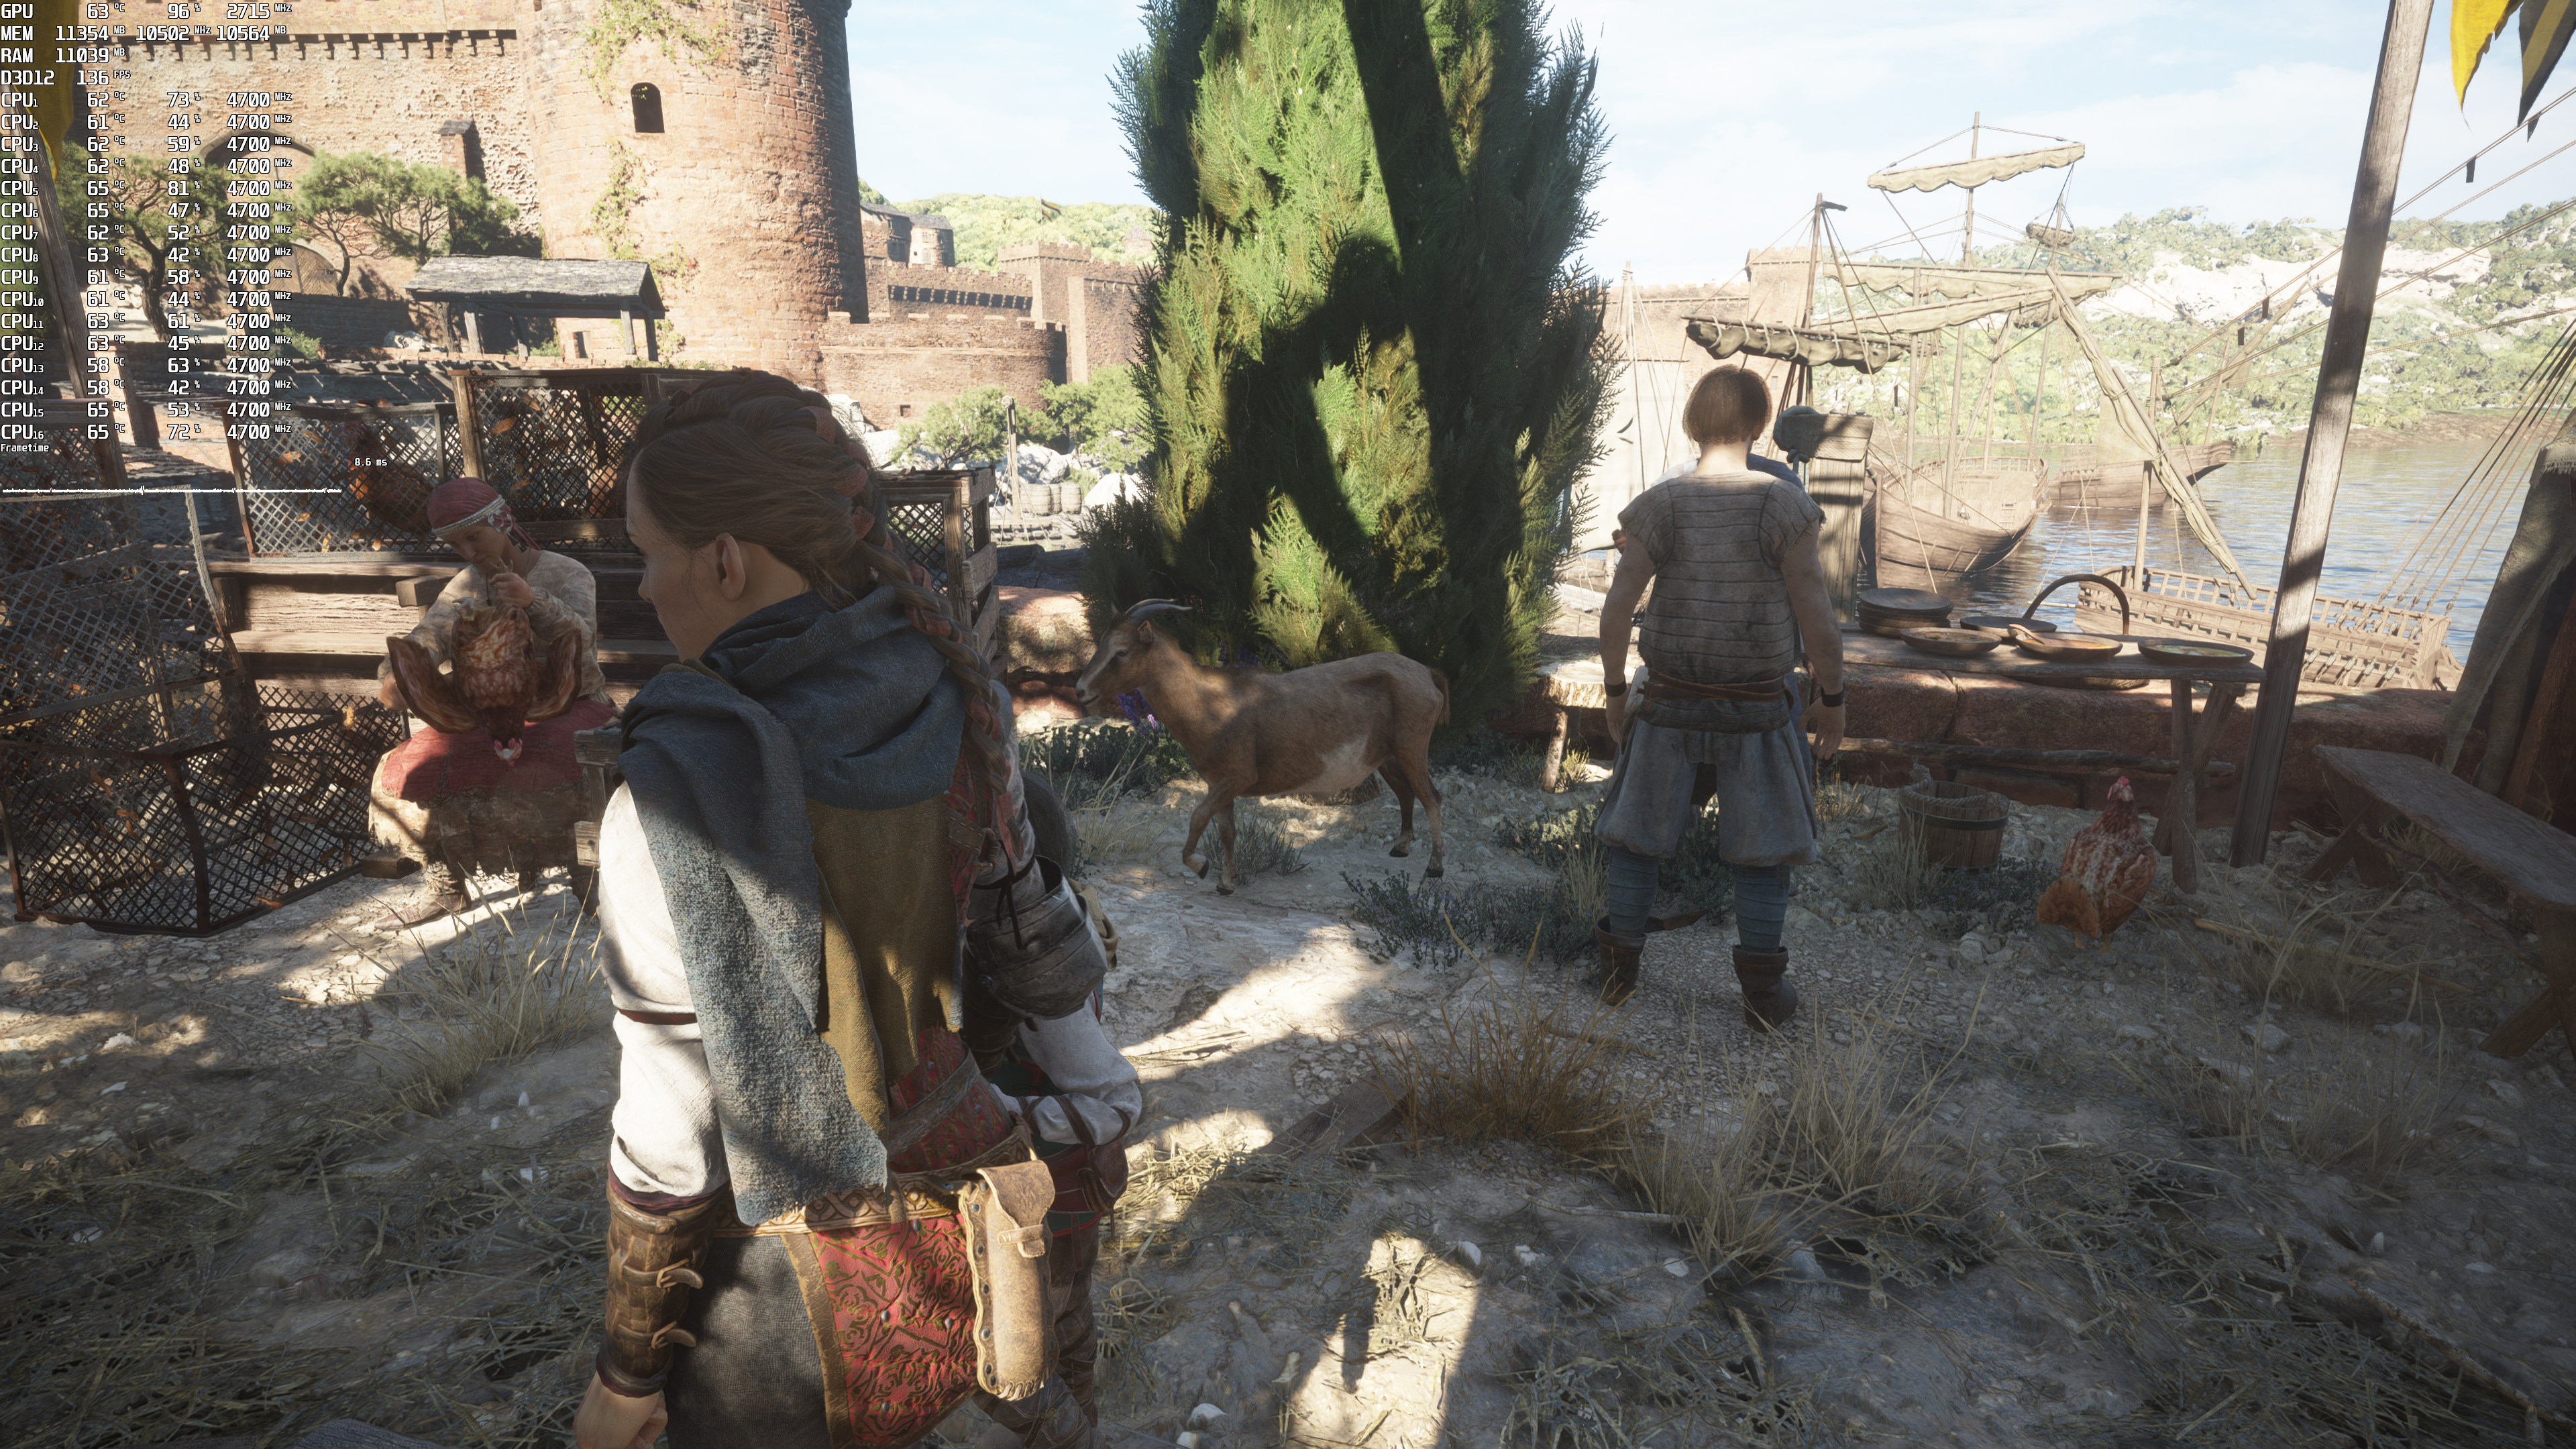 A Plague Tale: Requiem looks WORSE with Ray Tracing, comparison screenshots